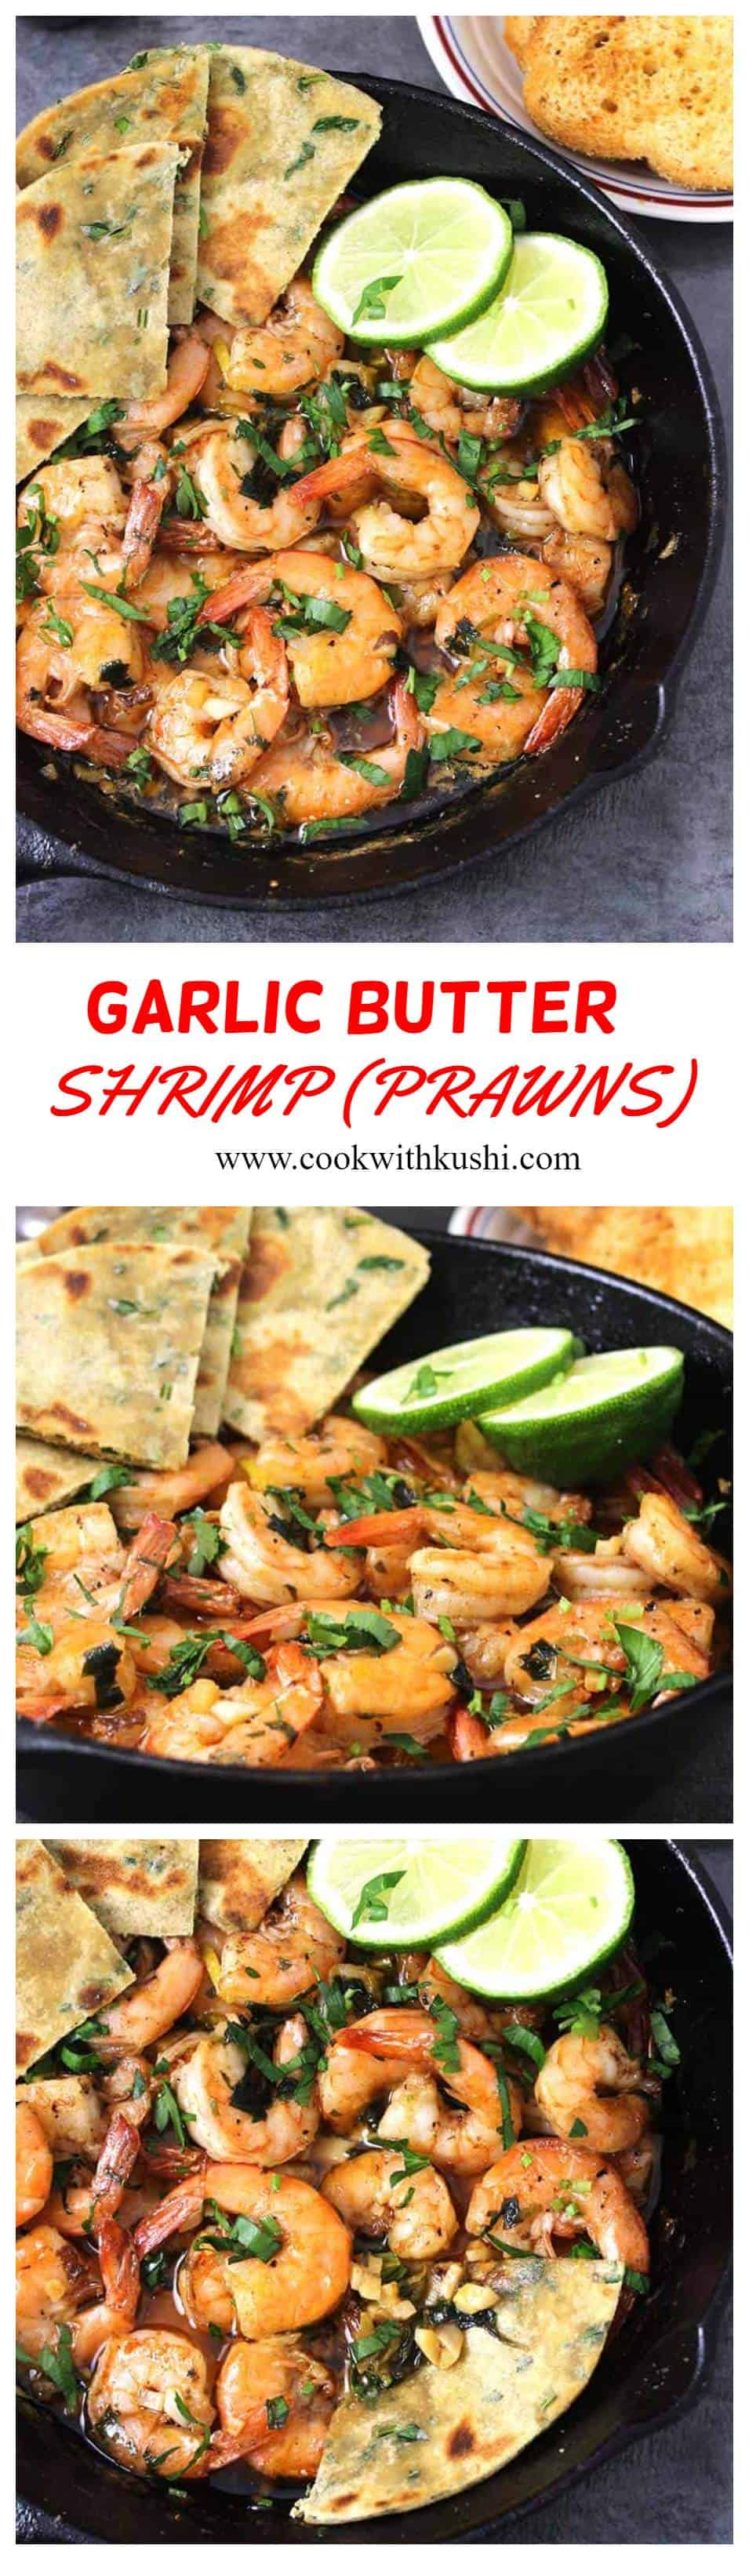 Garlic Butter Shrimp or Prawns Butter Garlic is super easy to make dish for any meal - with an amazing flavor combination of garlic, butter, and a hint of lime (lemon). This recipe is ready in less than 25 minutes. Today I have served it with Avocado Flatbread. #garlicbutter #seafoodrecipes #shrimprecipes #dinnerrecipes #lunchideas #footballfood #thanksgivingsides #christmasdinner #appetizers